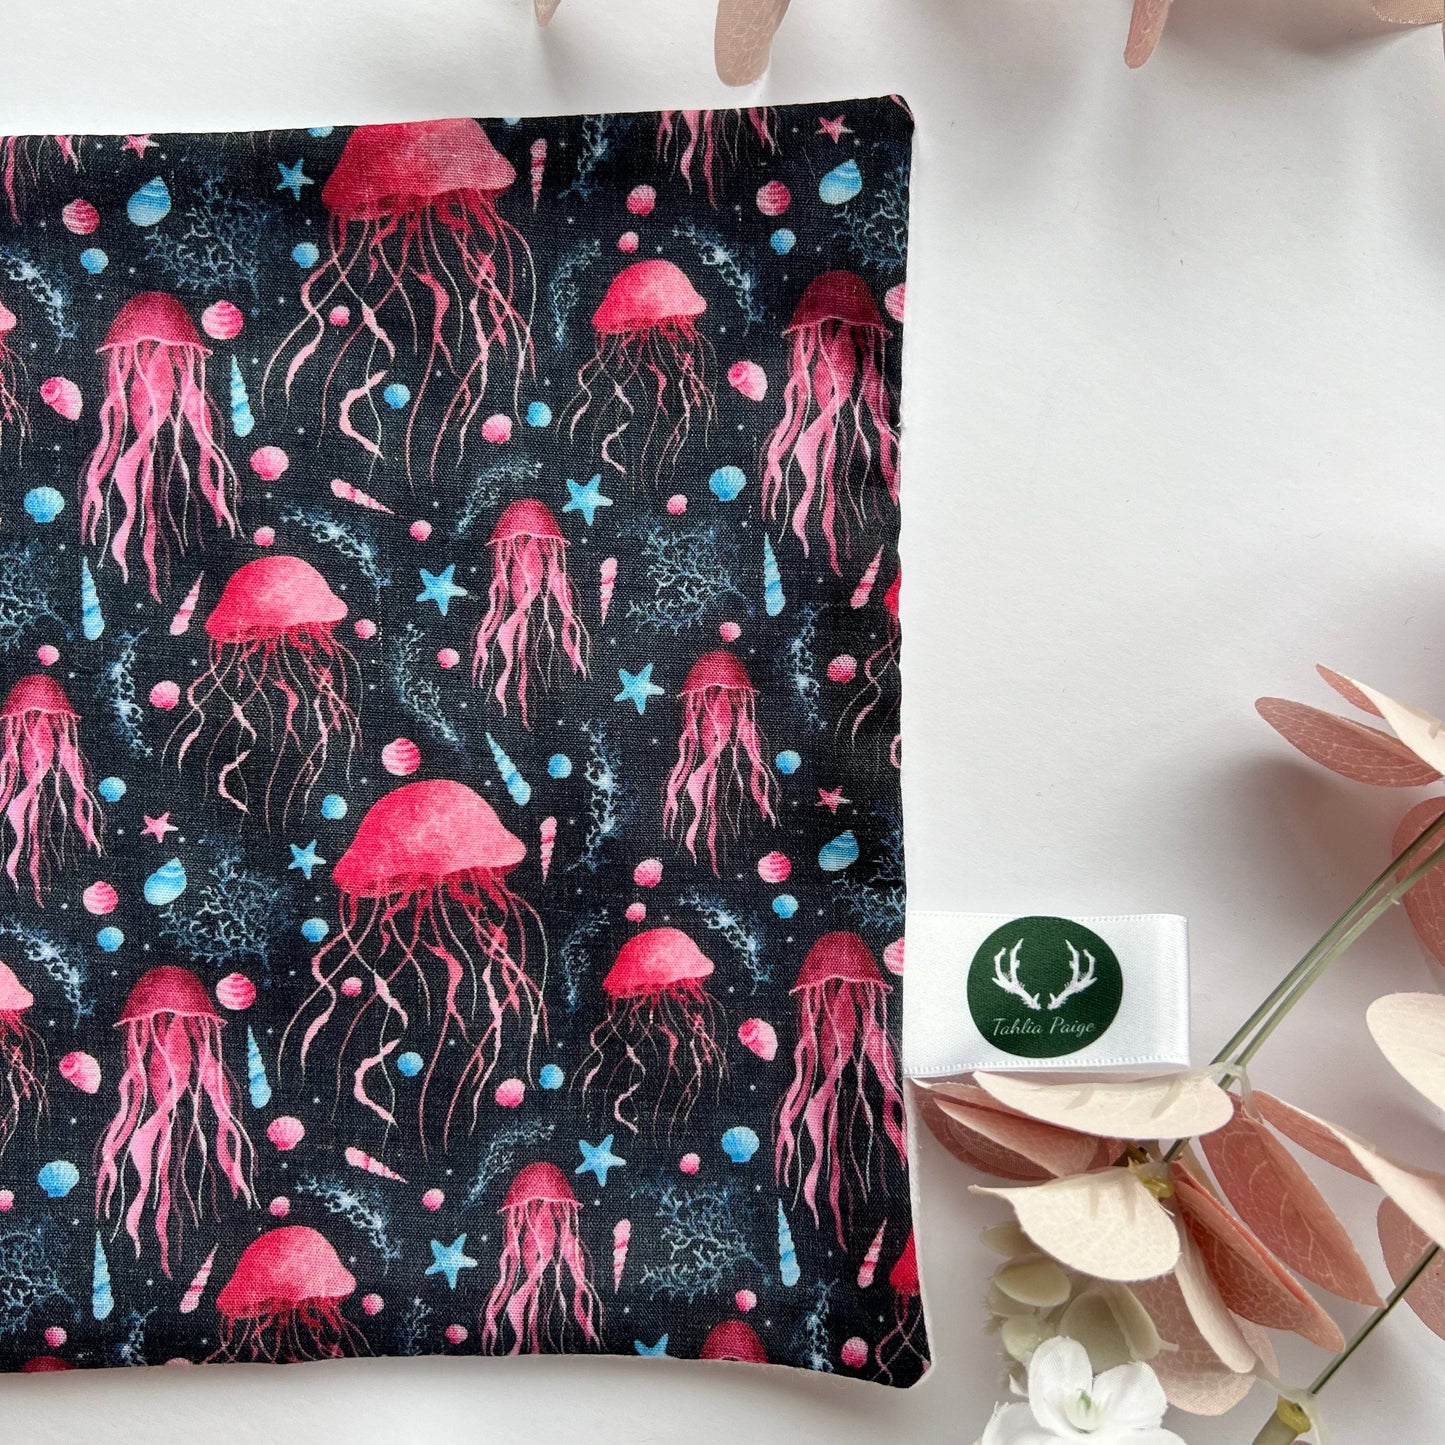 Jellyfish Facecloth